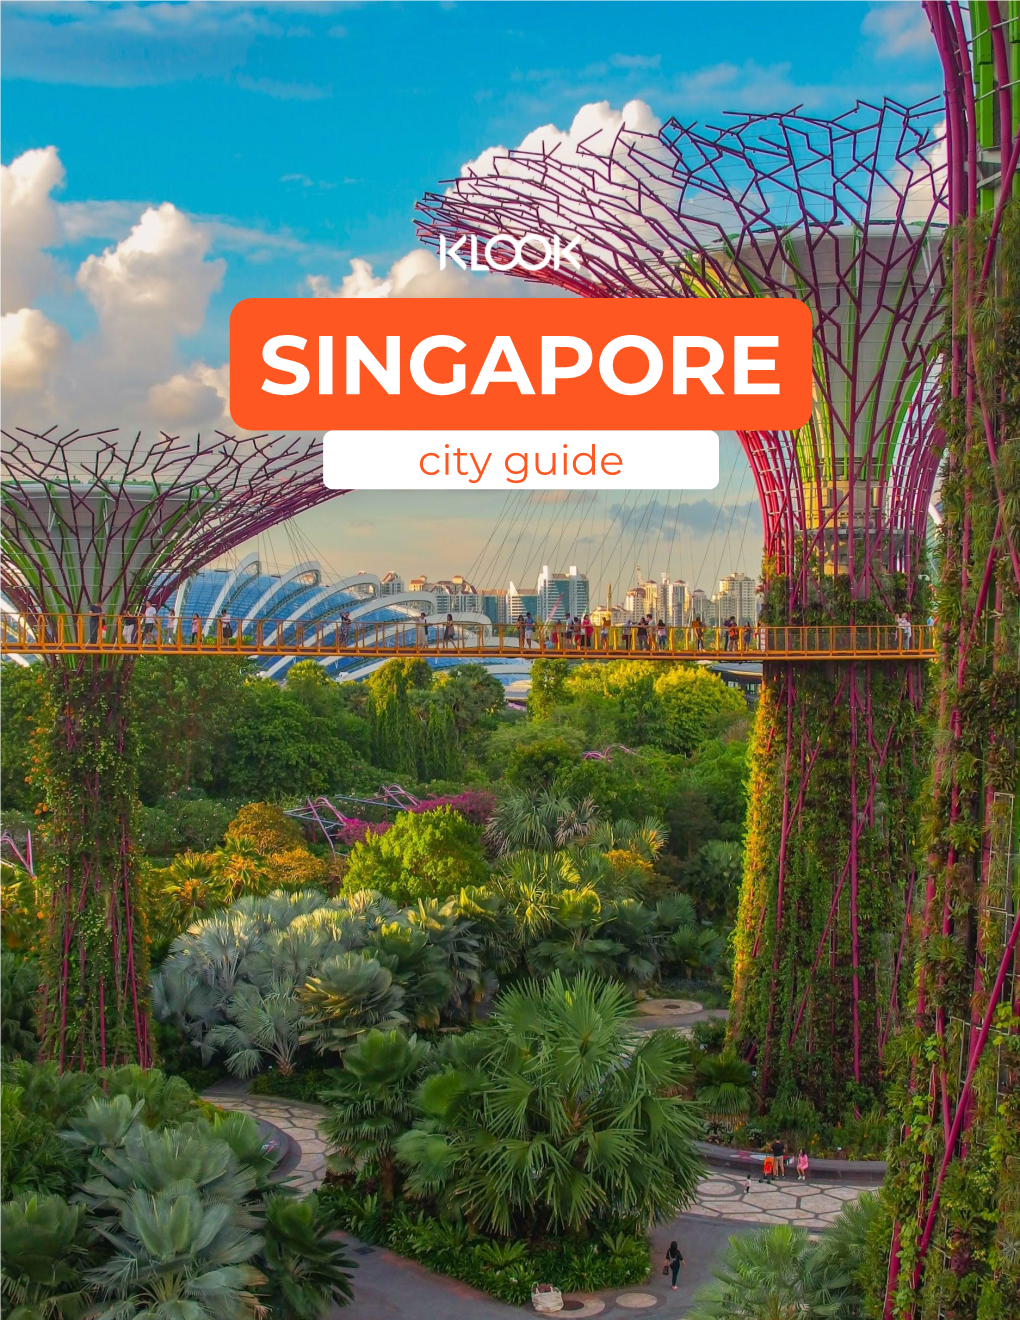 SINGAPORE City Guide WELCOME COUPON